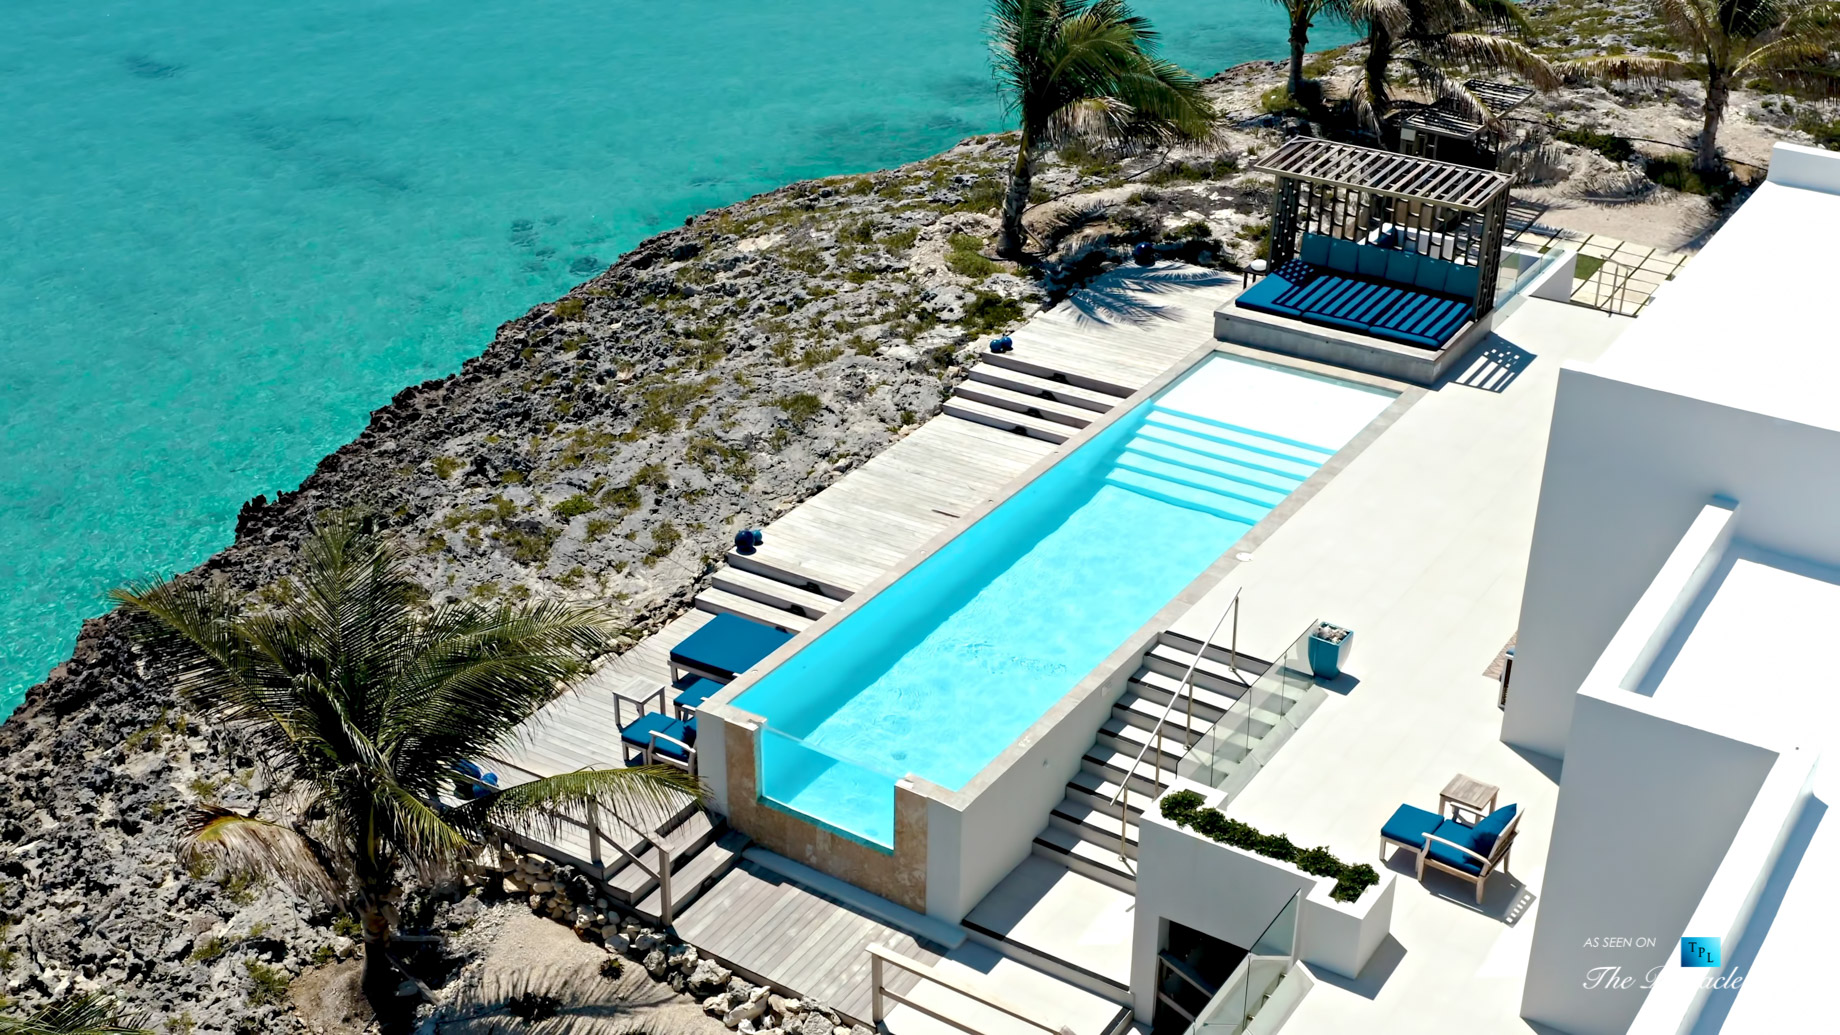 Tip of the Tail Villa – Providenciales, Turks and Caicos Islands – Caribbean House Infinity Pool Deck – Luxury Real Estate – South Shore Peninsula Home